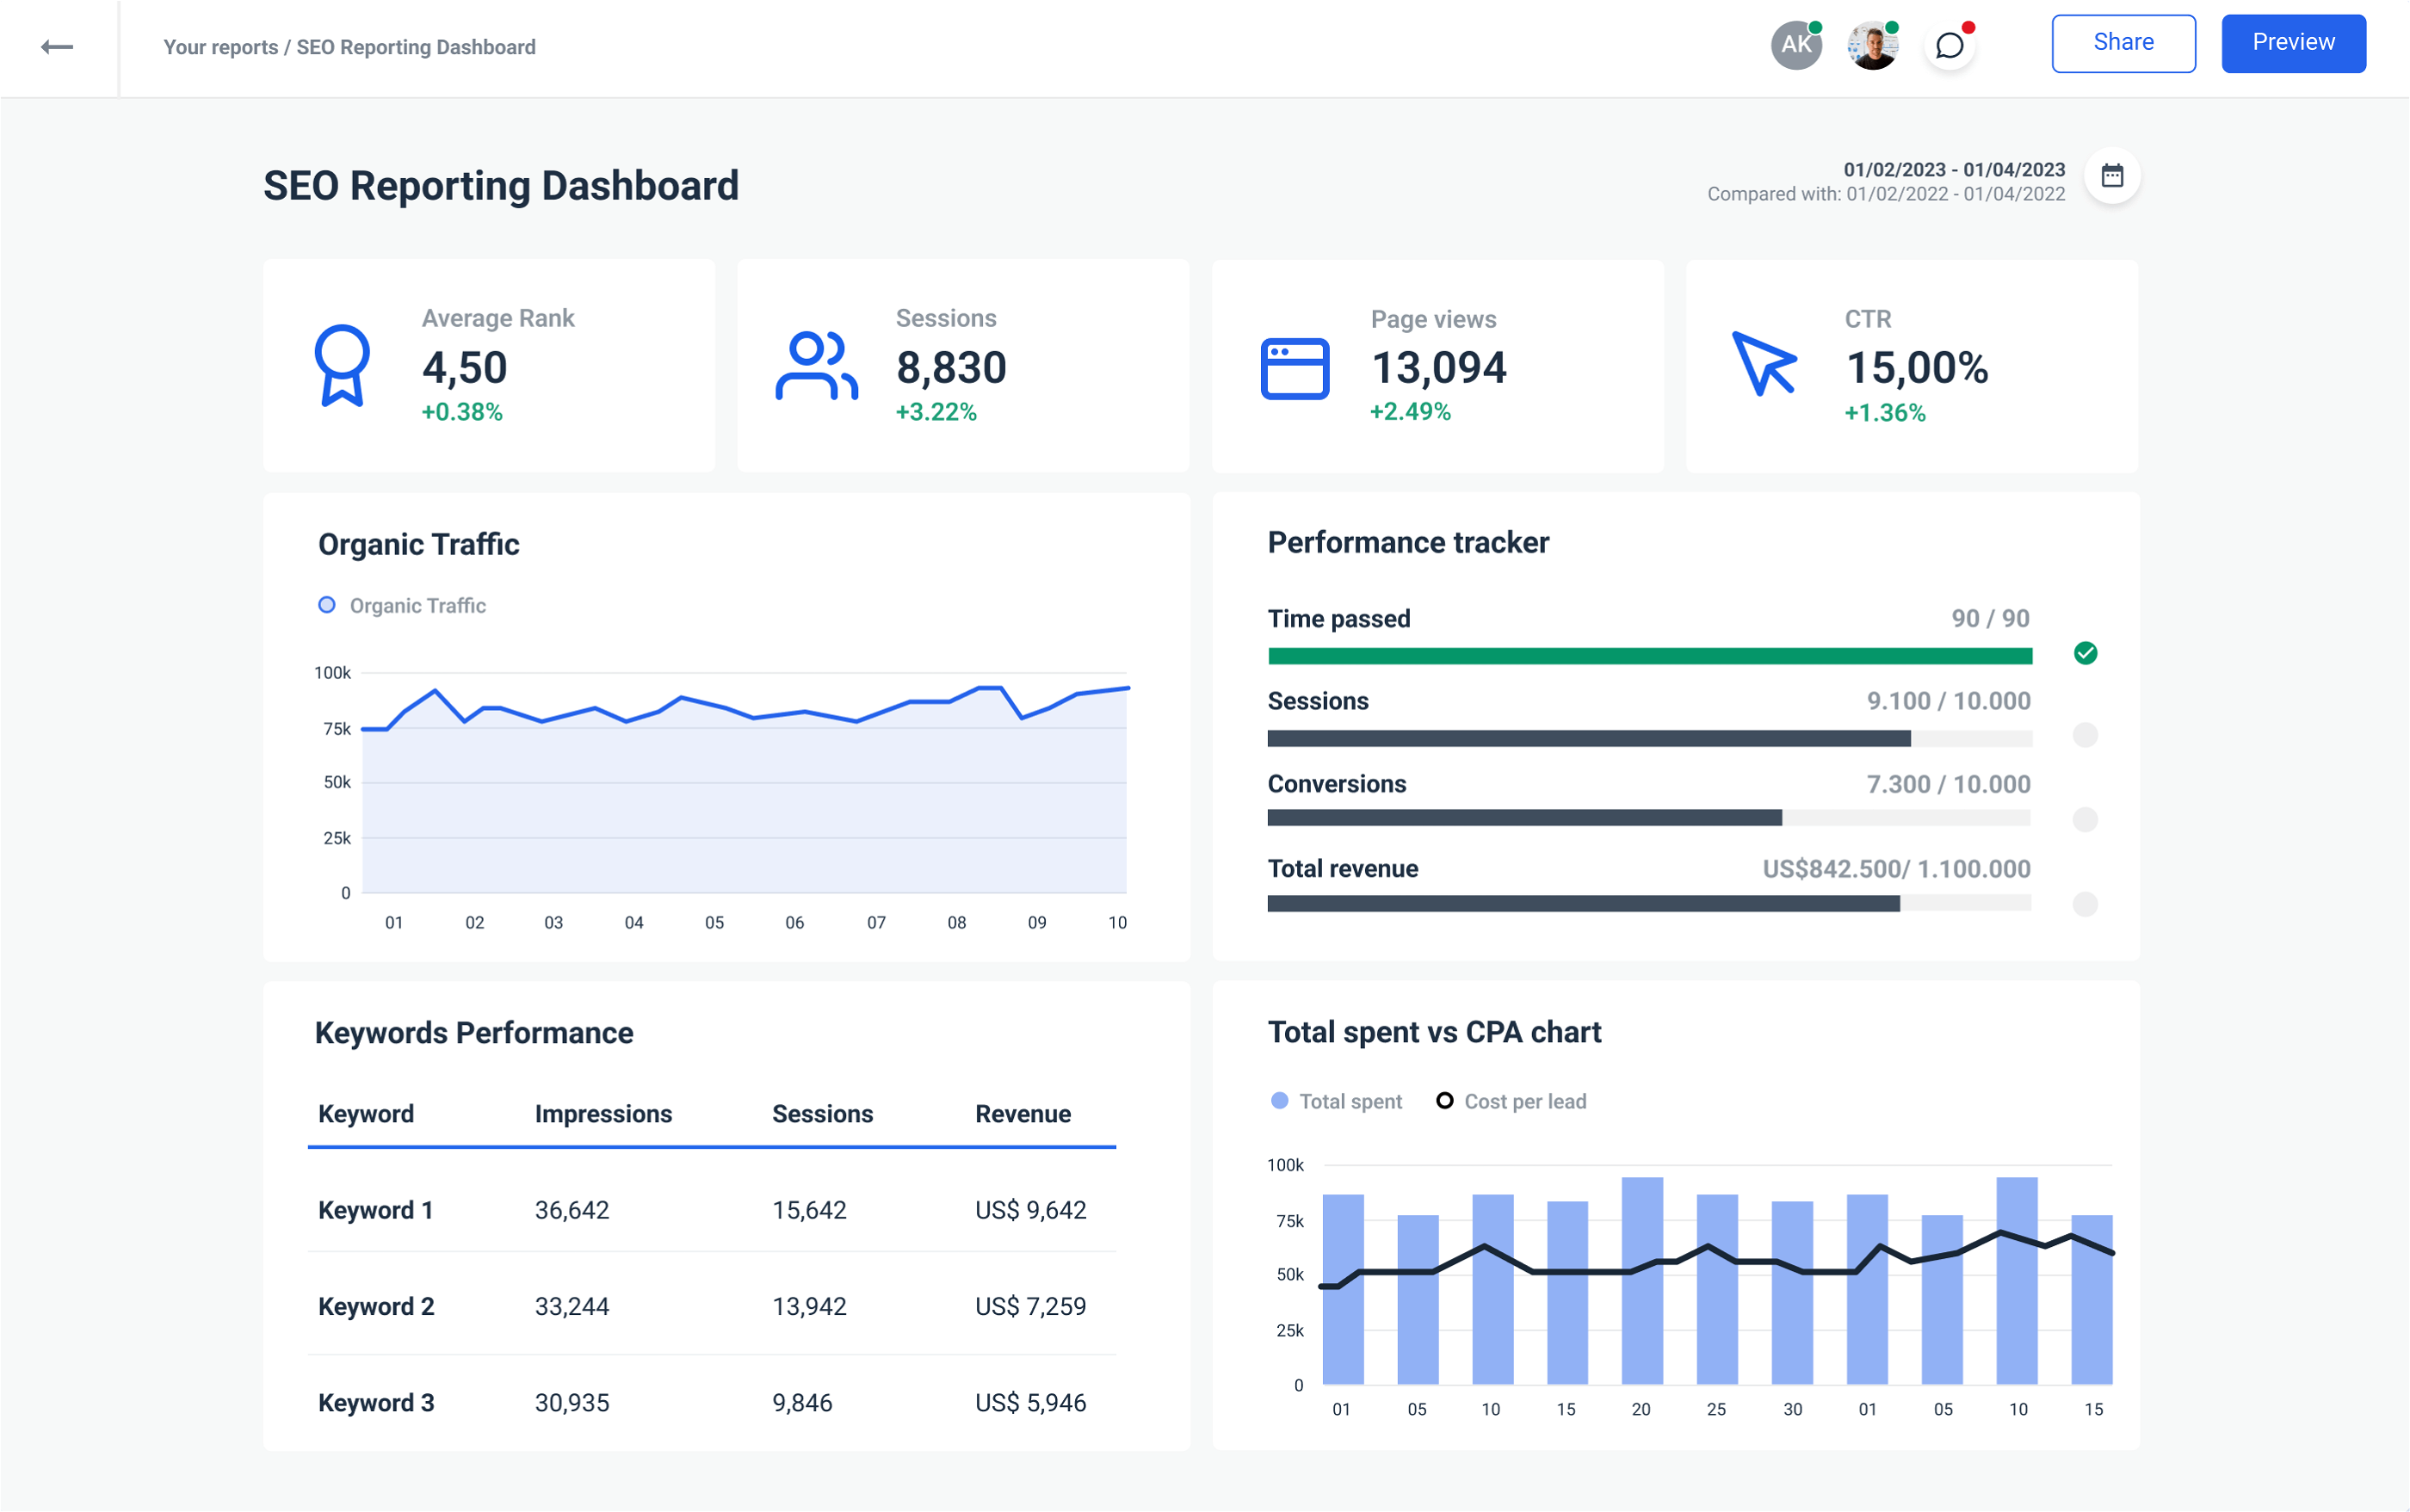 SEO reporting dashboard from Whatagraph